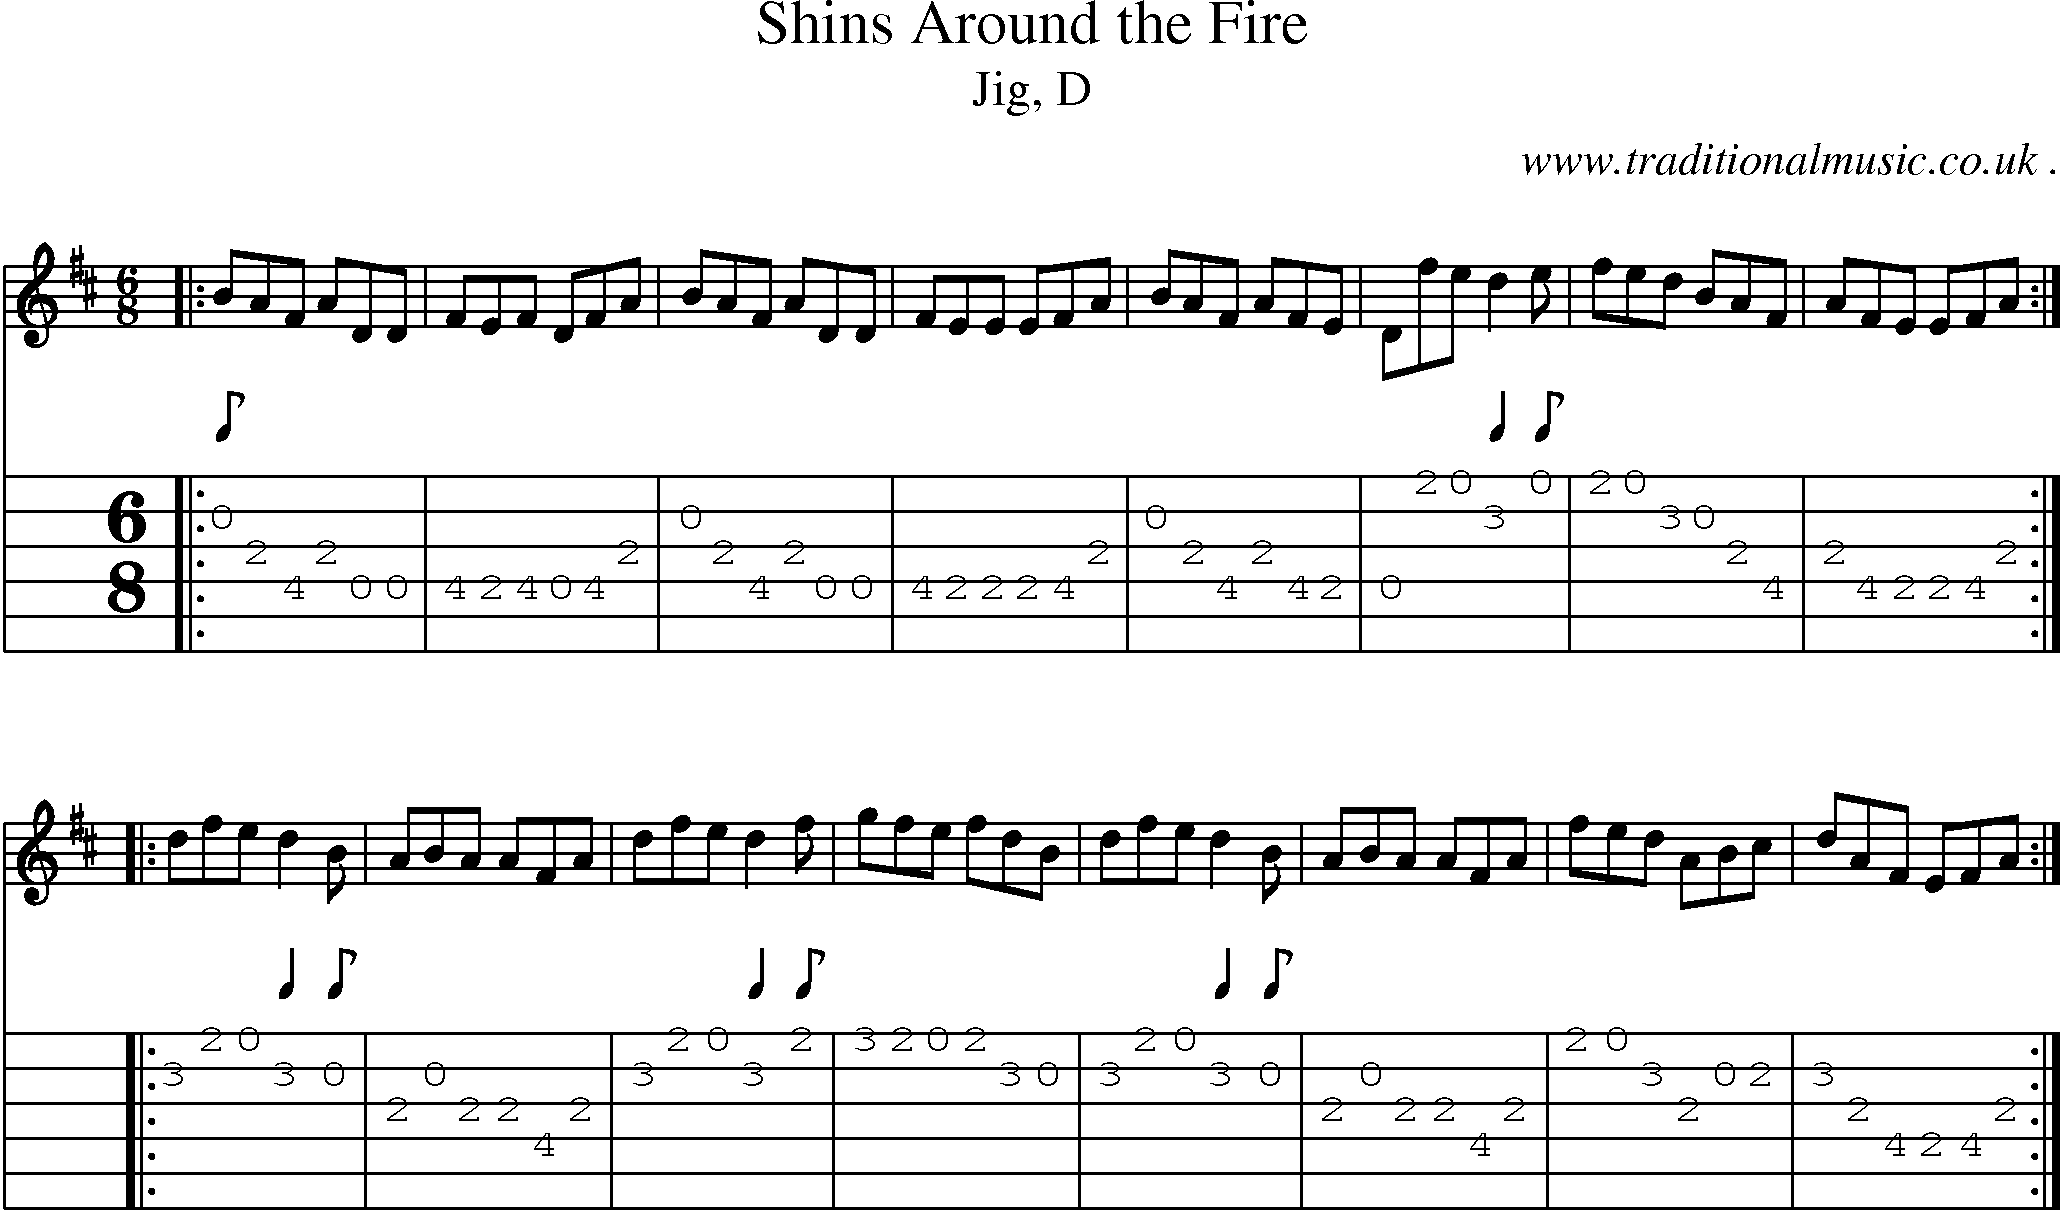 Sheet-music  score, Chords and Guitar Tabs for Shins Around The Fire